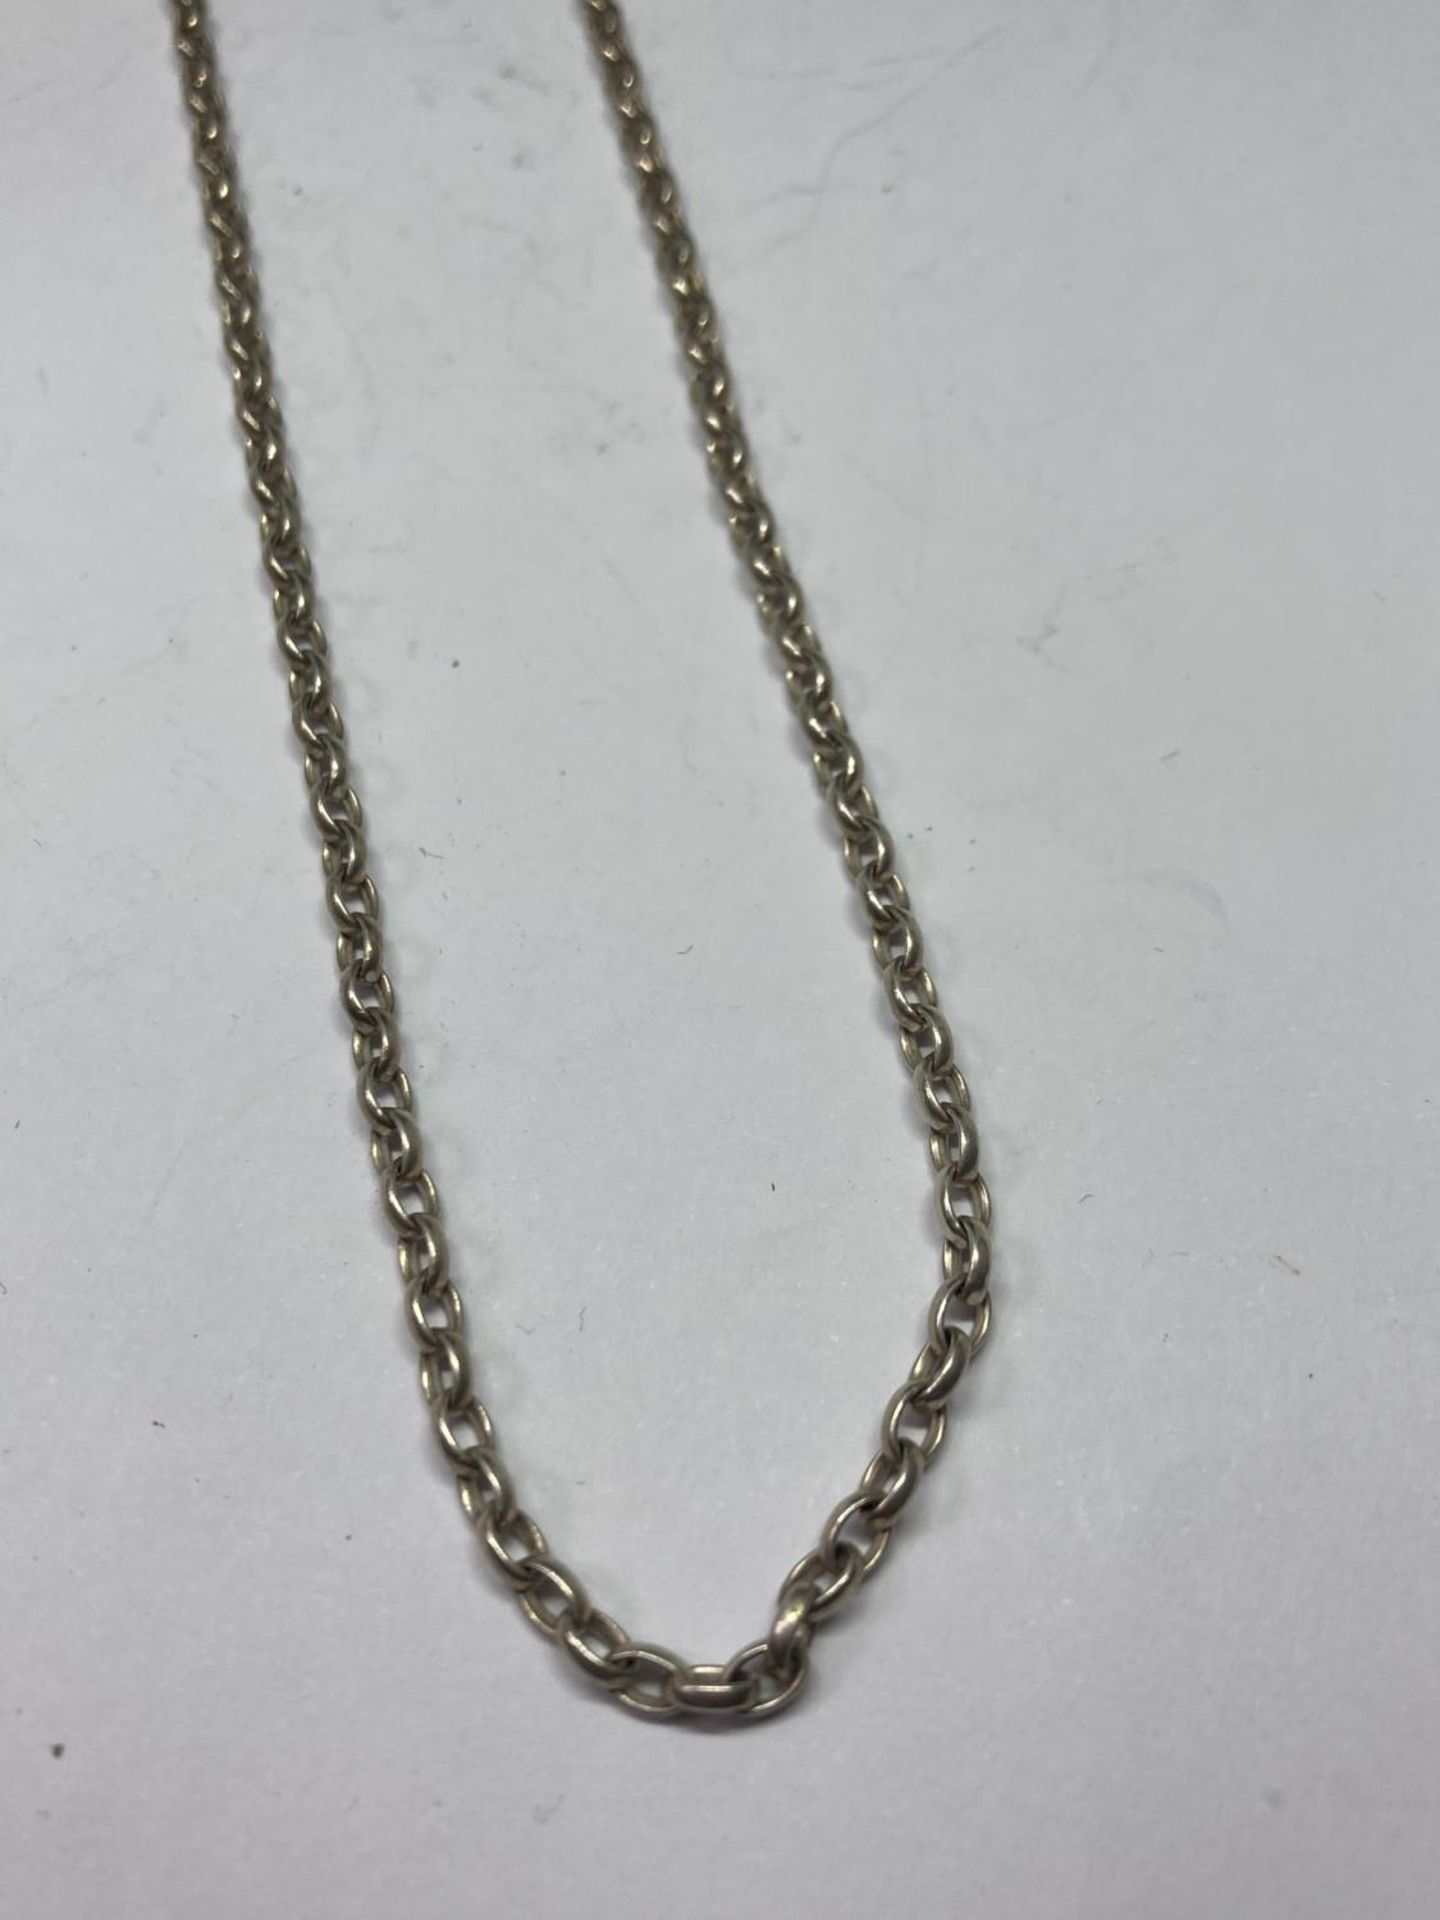 A SILVER BELCHER NECKLACE LENGTH 22" - Image 2 of 3